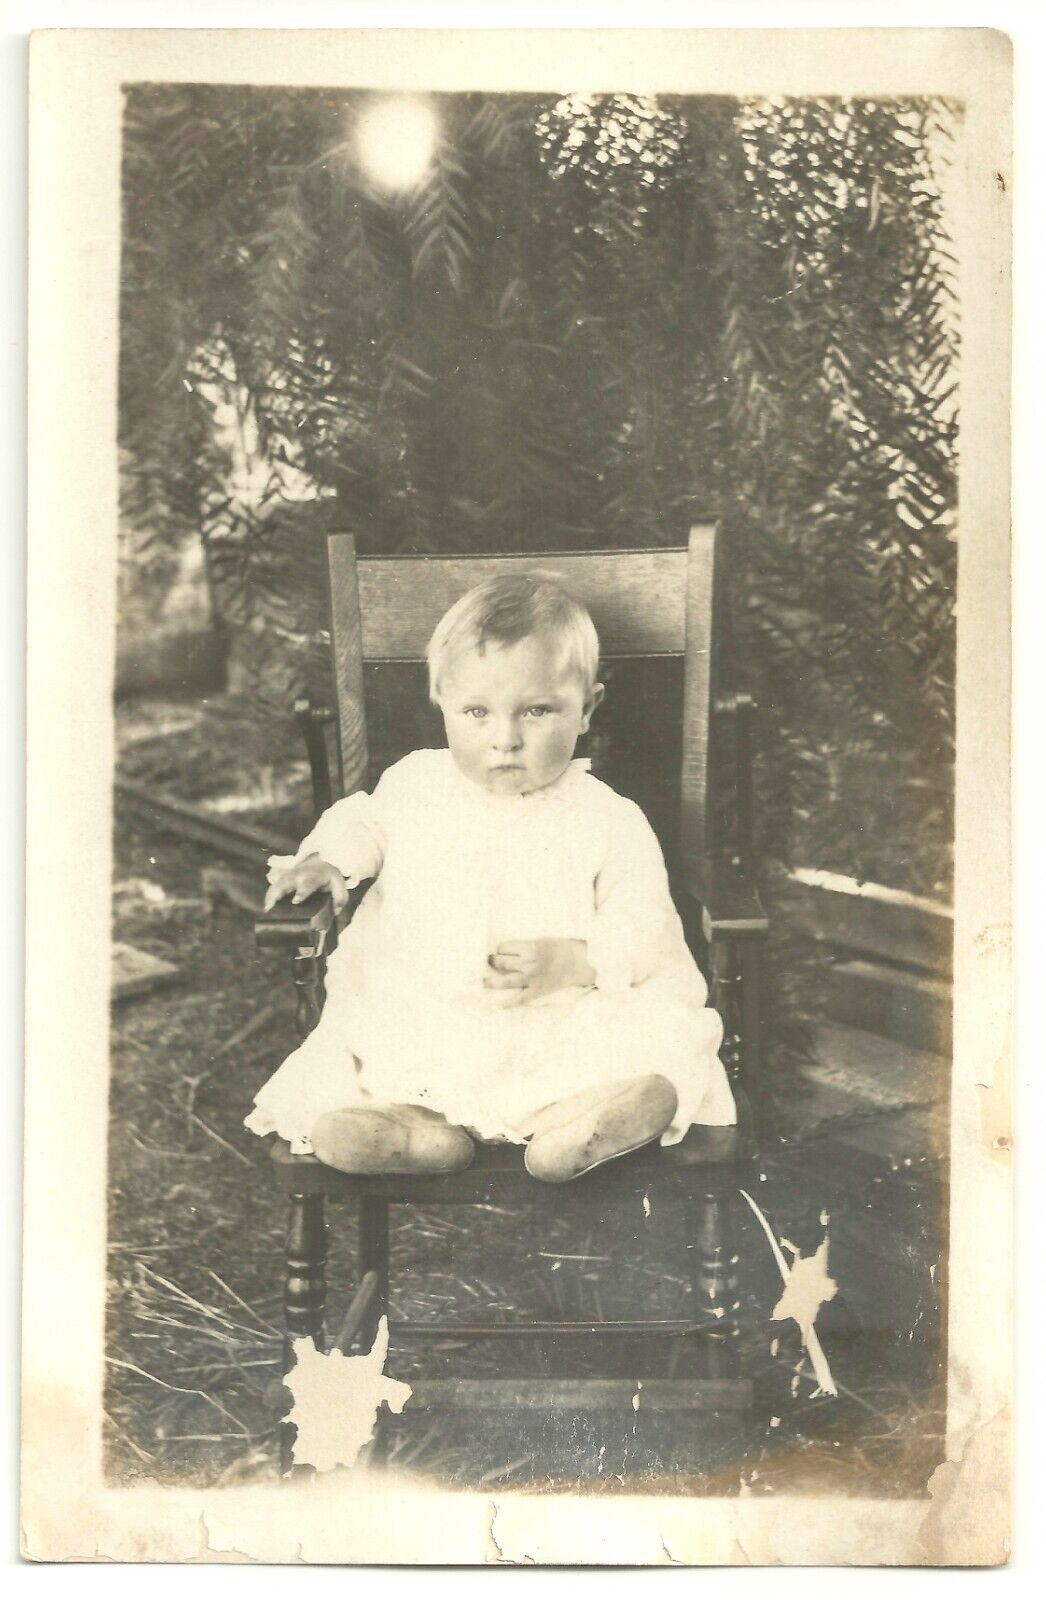 1900s Postcard RPPC Family Young Child Toddler Baby Photo Cyko Stamp Box VTG